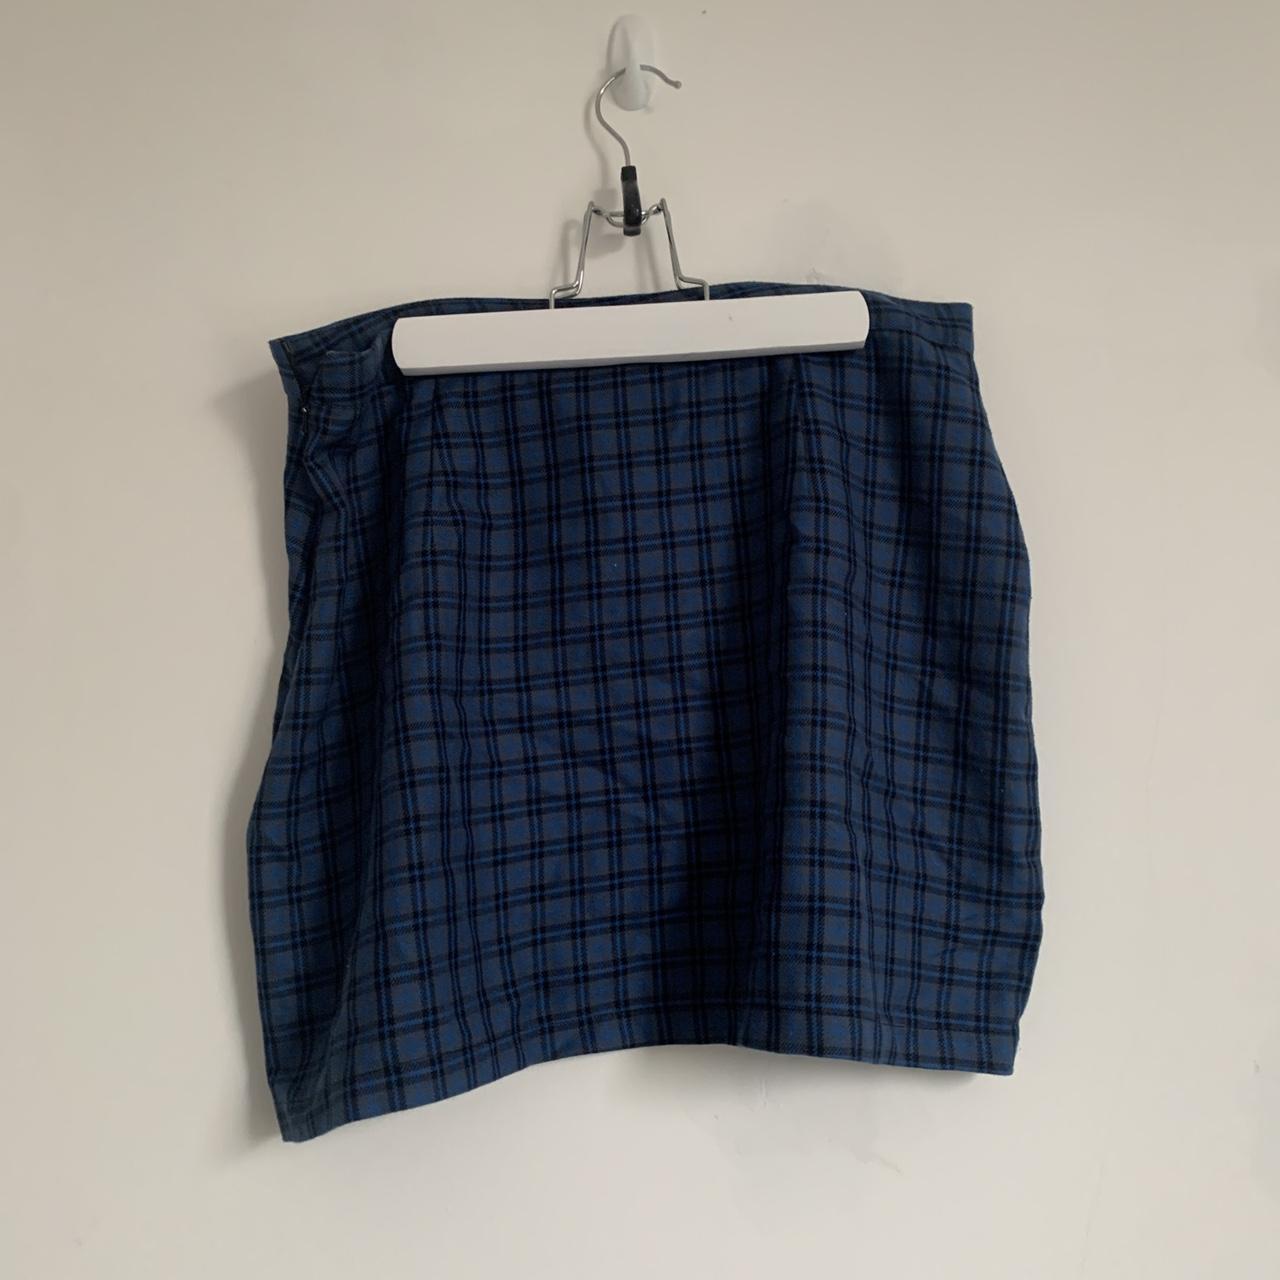 Urban Outfitters mini blue check skirt, selling as... - Depop